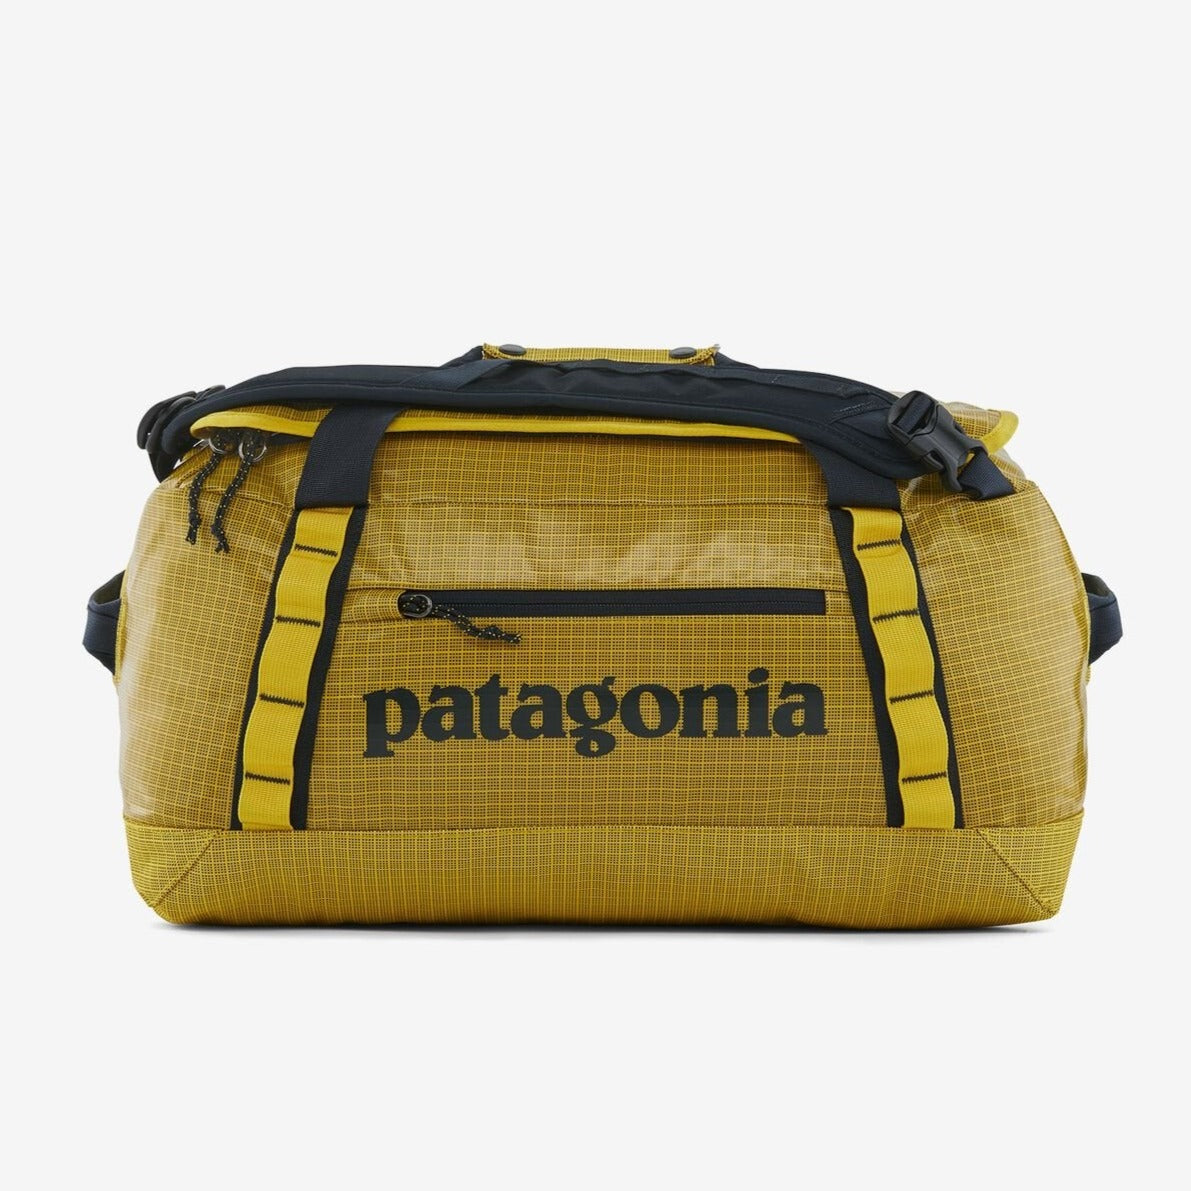 Patagonia Black Hole Duffel Bag 40L-Luggage-Shine Yellow-Kevin's Fine Outdoor Gear & Apparel